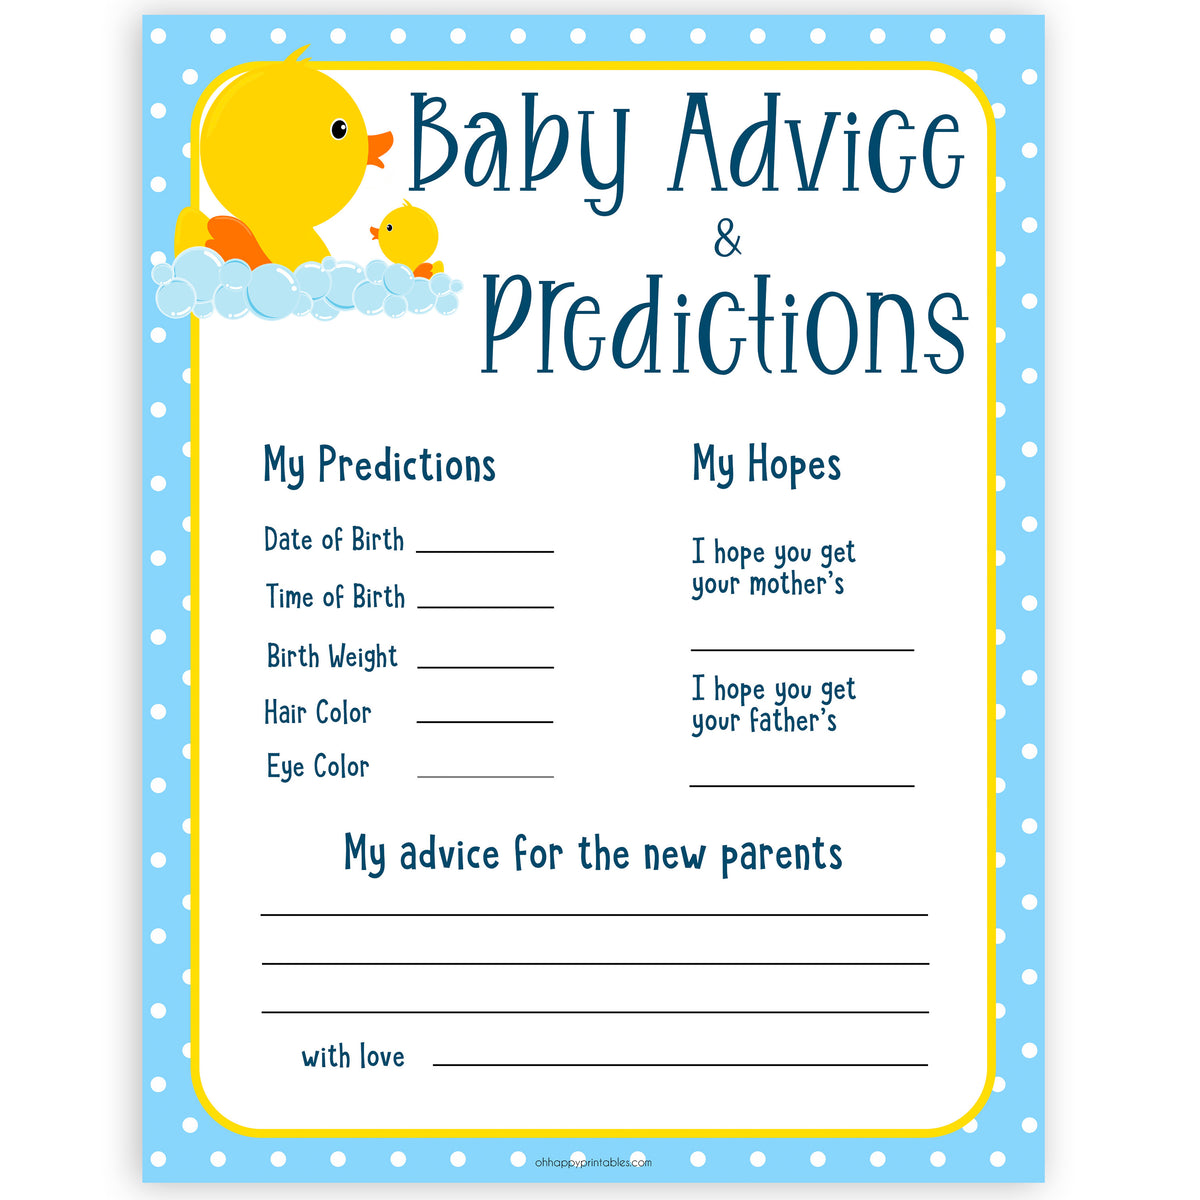 new-baby-advice-predictions-card-rubber-ducky-printable-baby-games-ohhappyprintables